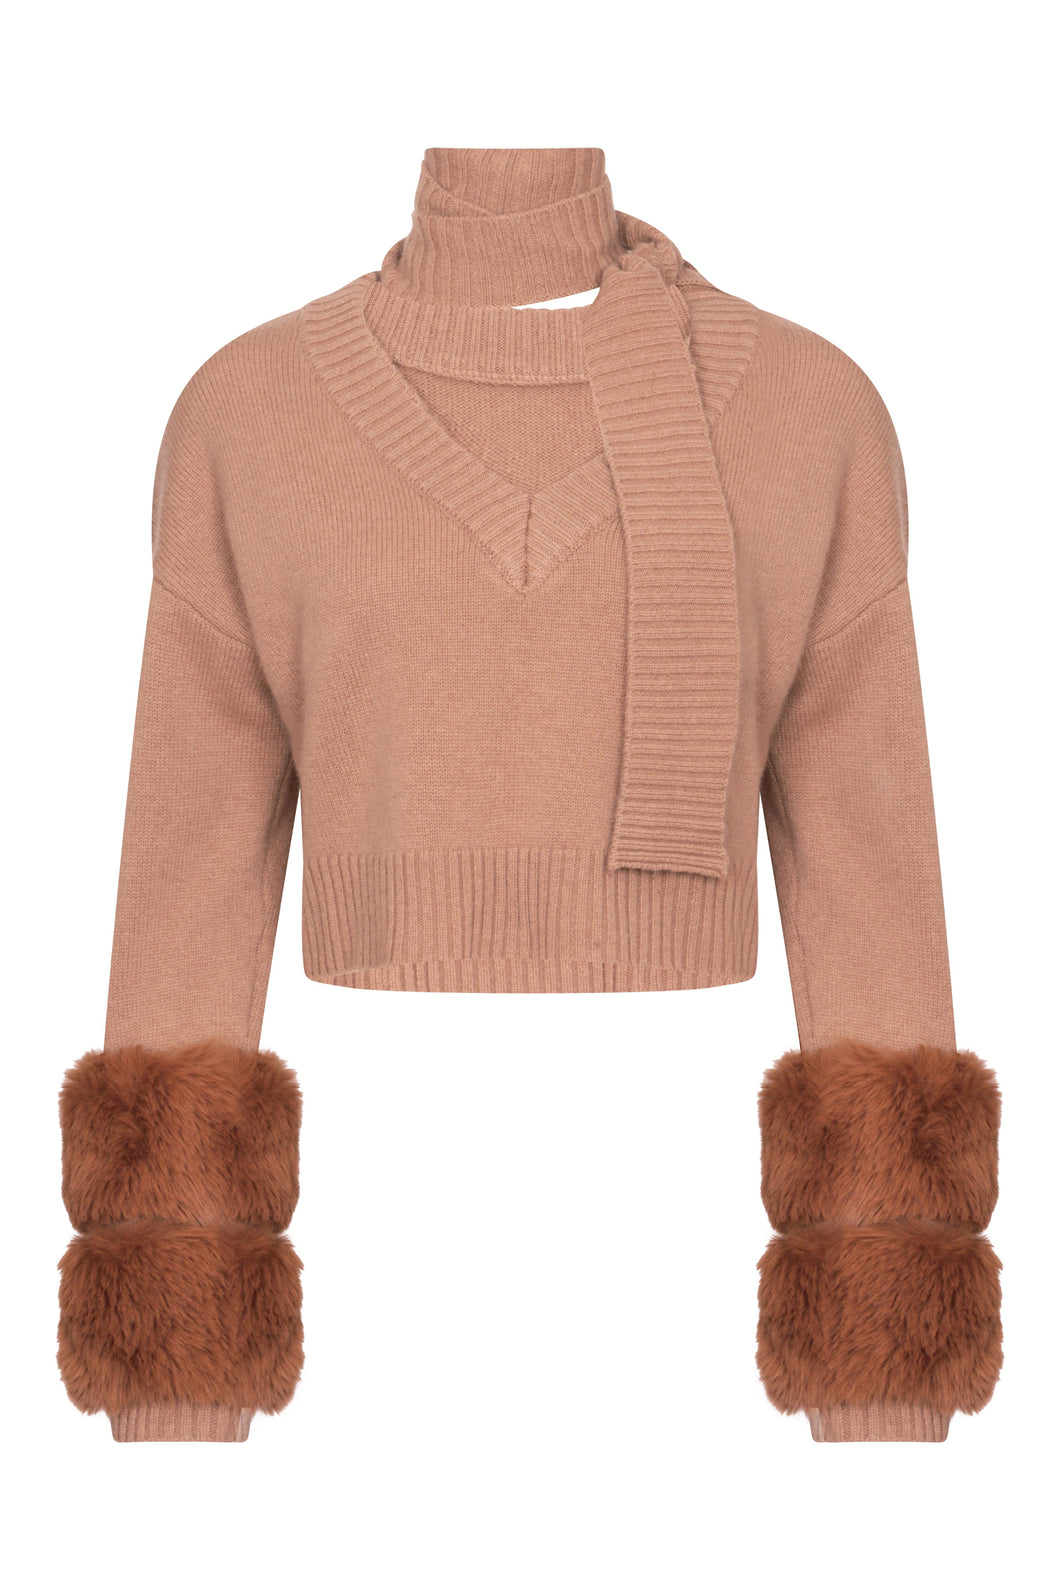 Cropped Faux Cuff Sweater with Necktie in Pecan